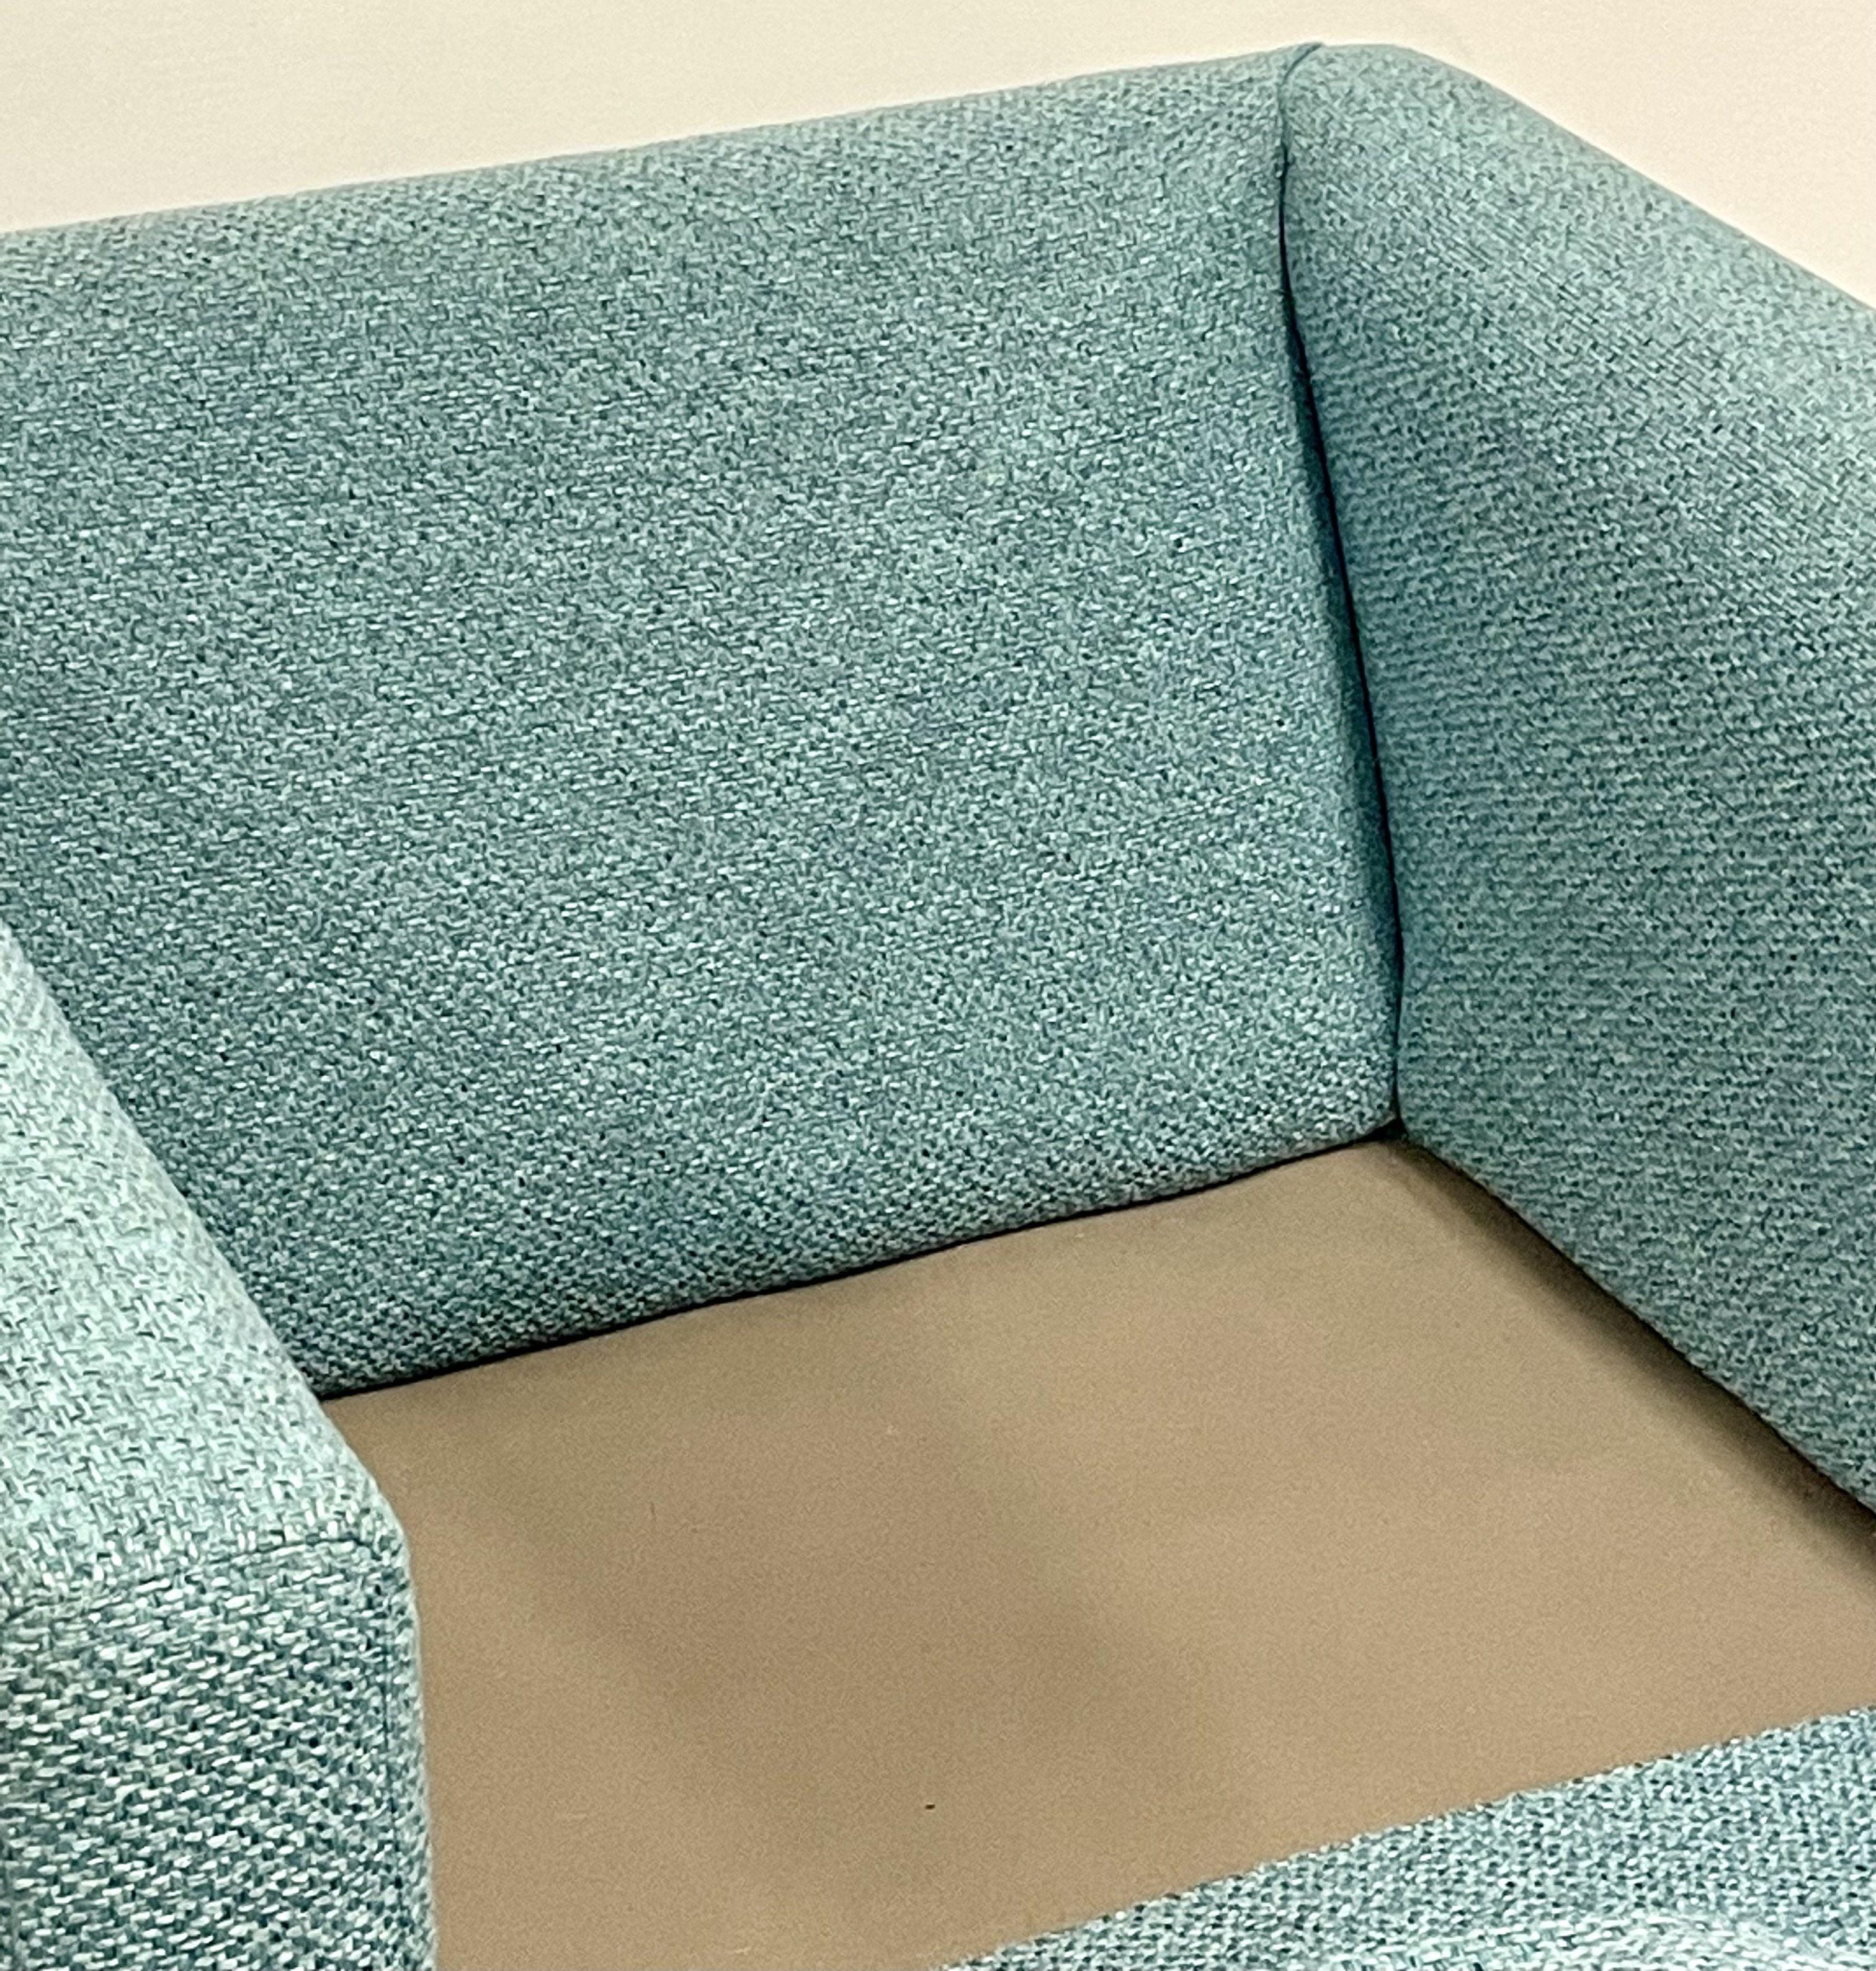 Pair Teal Milo Baughman Style Mid-Century Modern Lounge Chairs, Swivel, Square For Sale 8